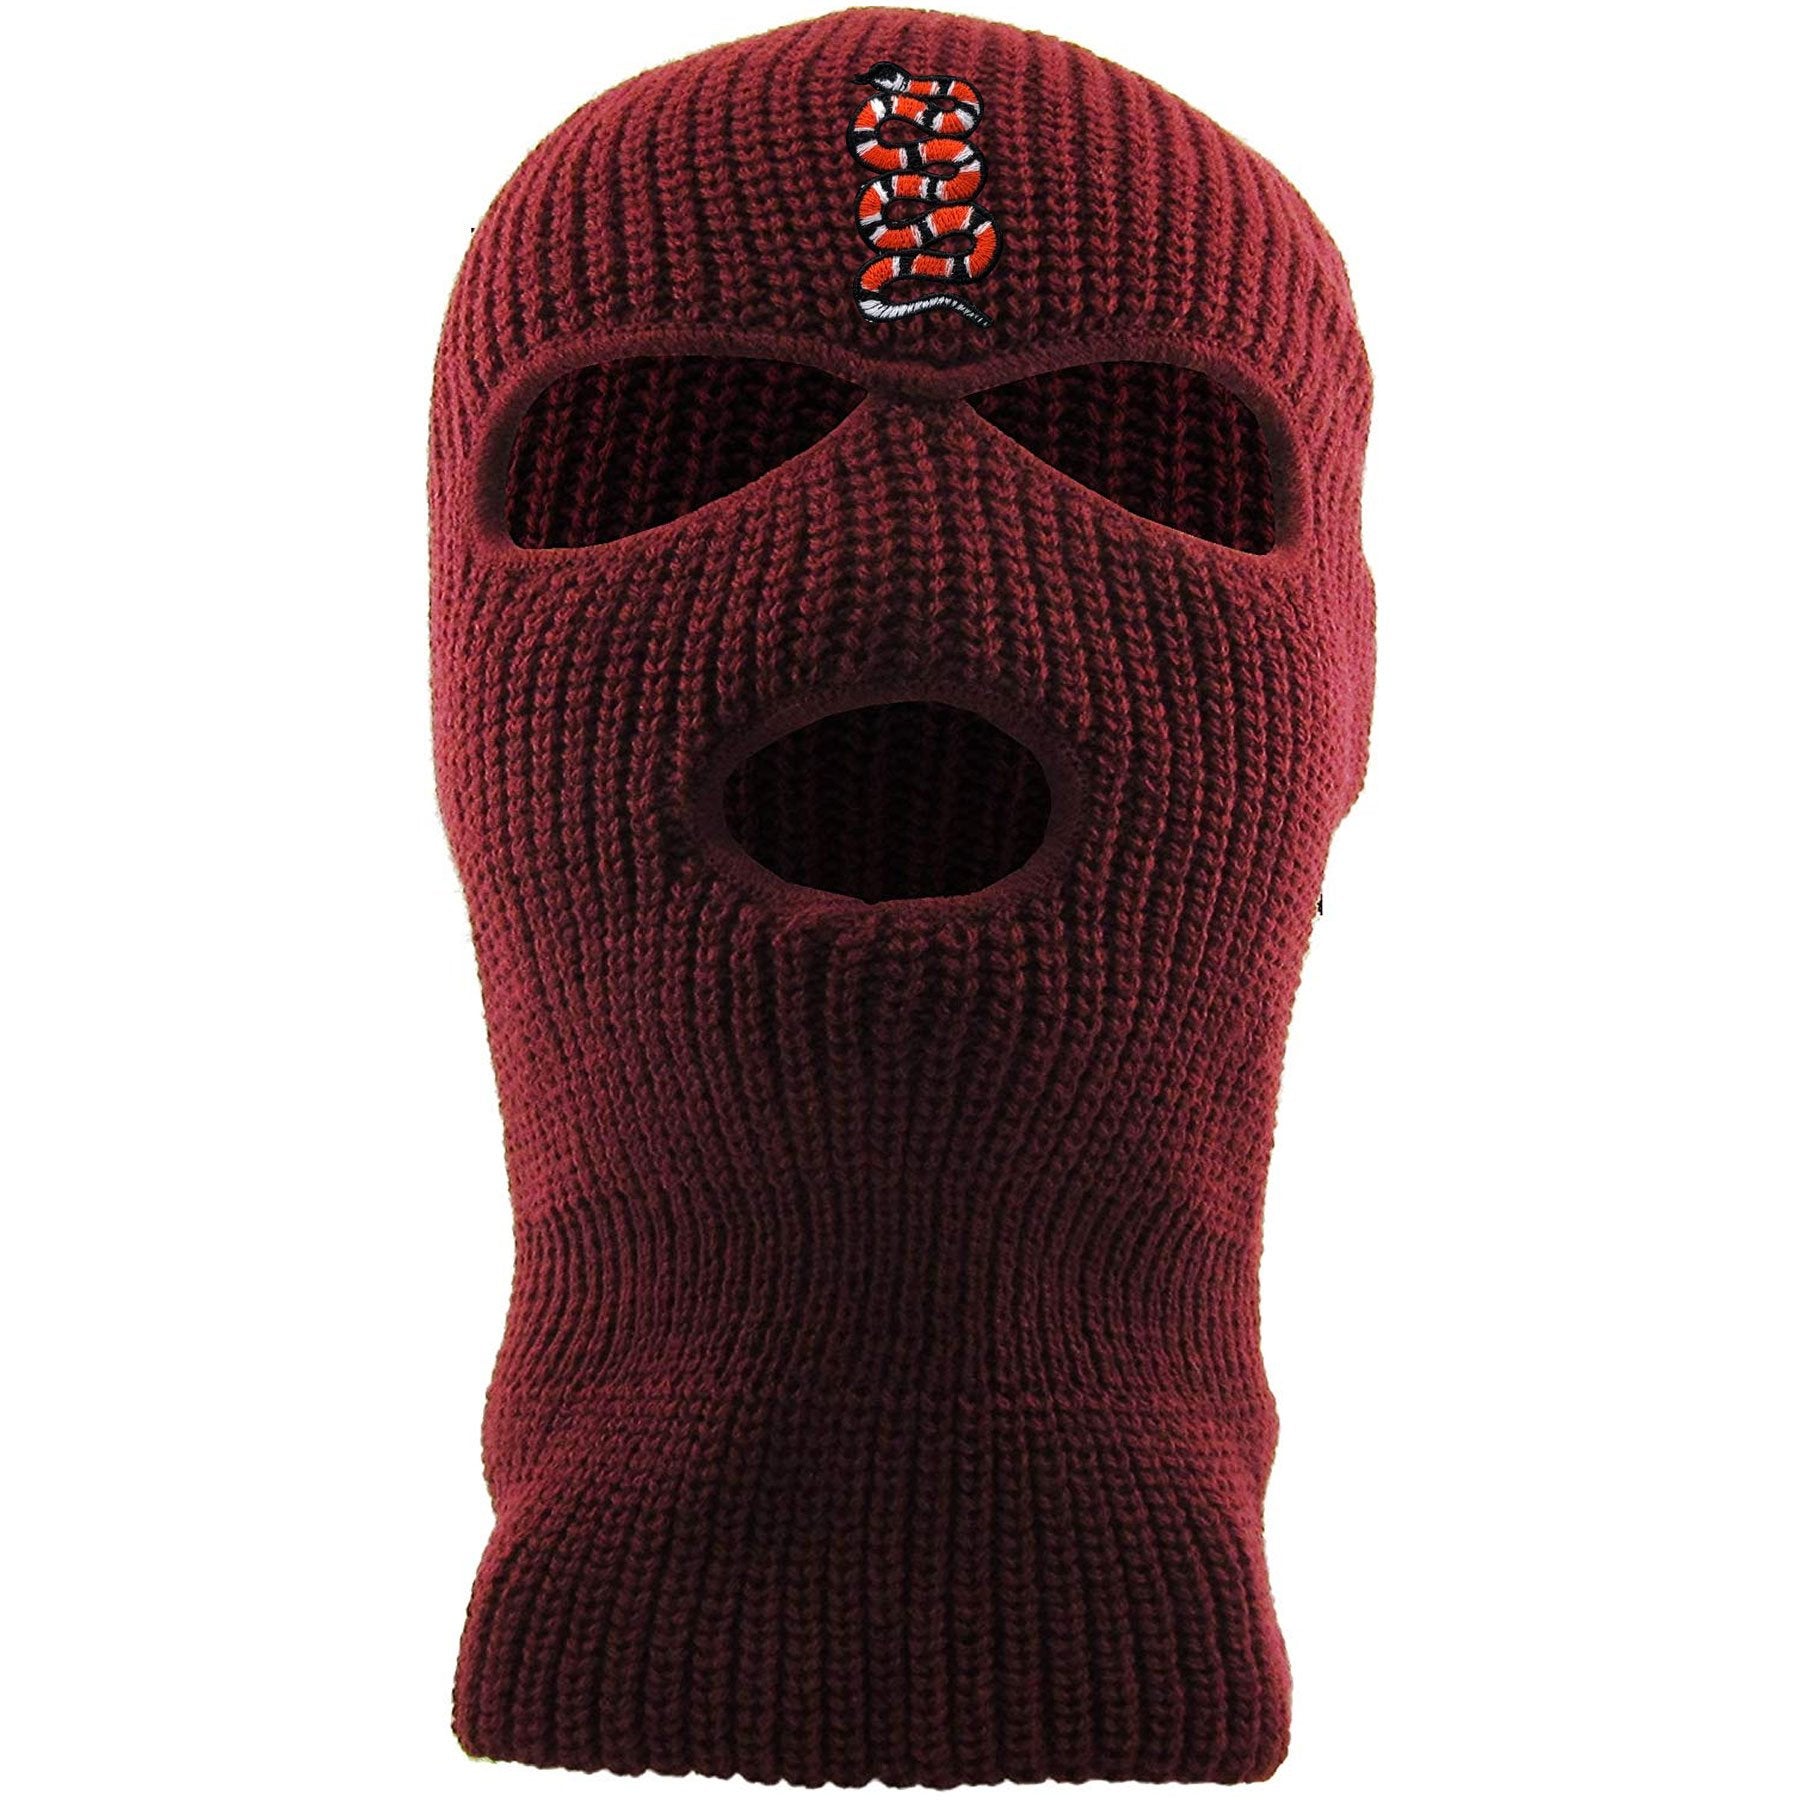 Embroidered on the forehead of the maroon coiled snake ski mask is the snake logo in red, white, and black